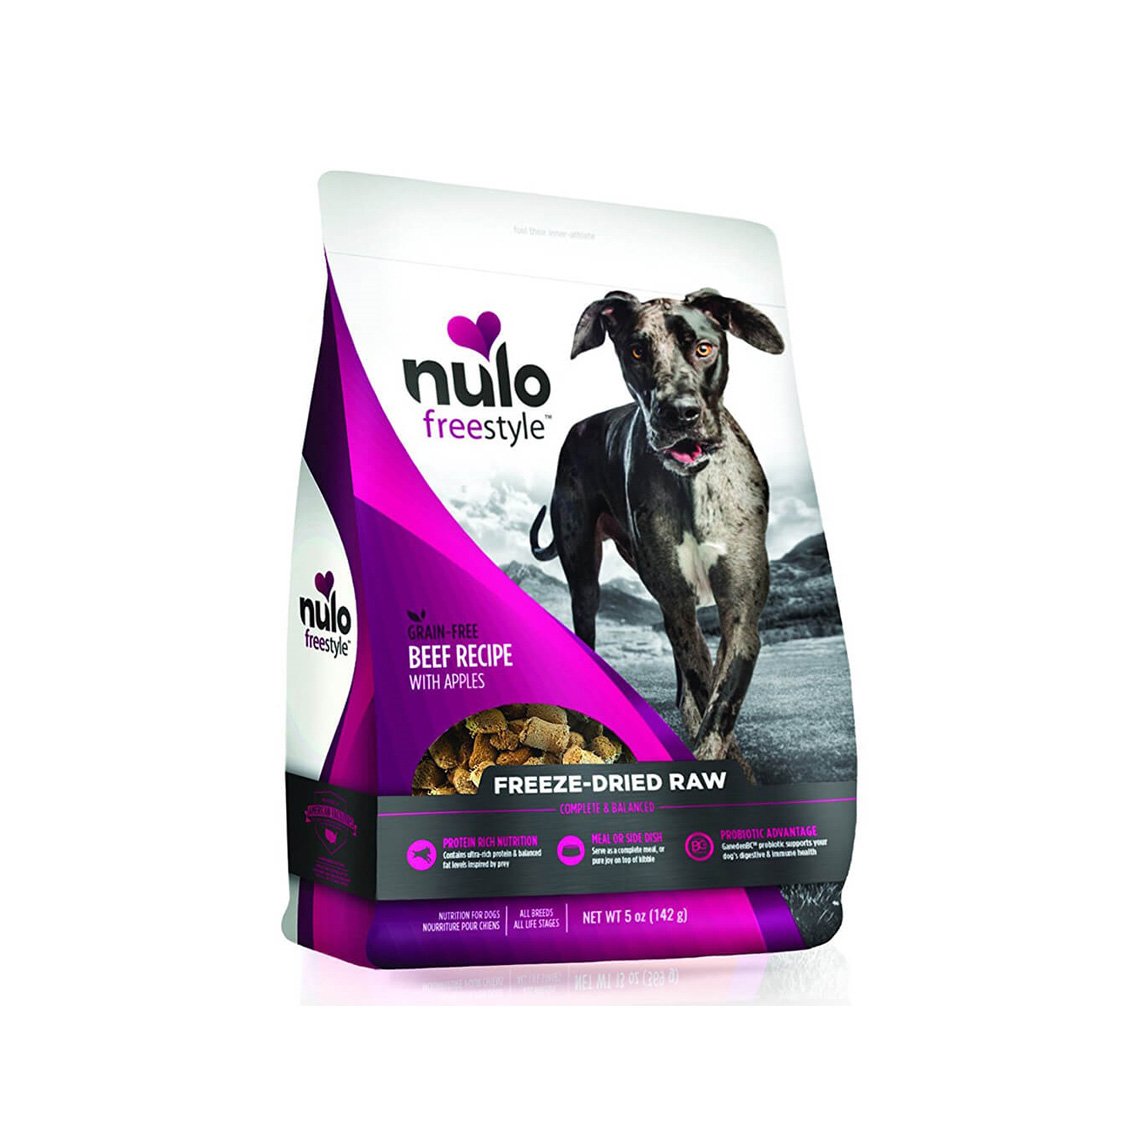 only natural pet freeze dried